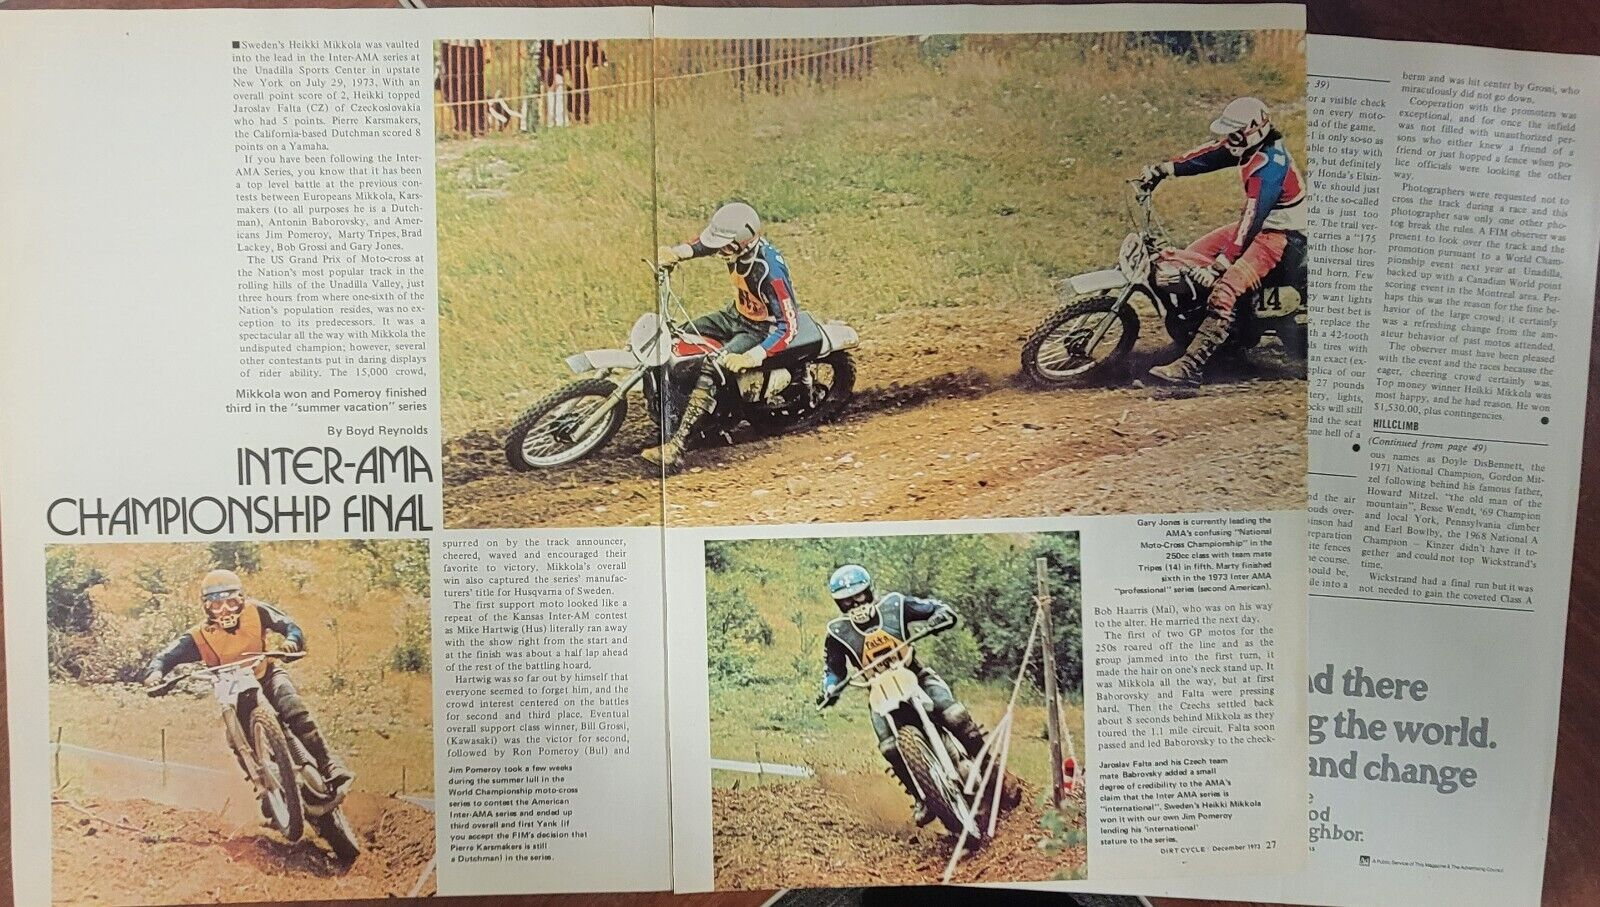 1973 German Grand Prix Race 6p Motorcycle Article Decoster Bauer Adolf Weil